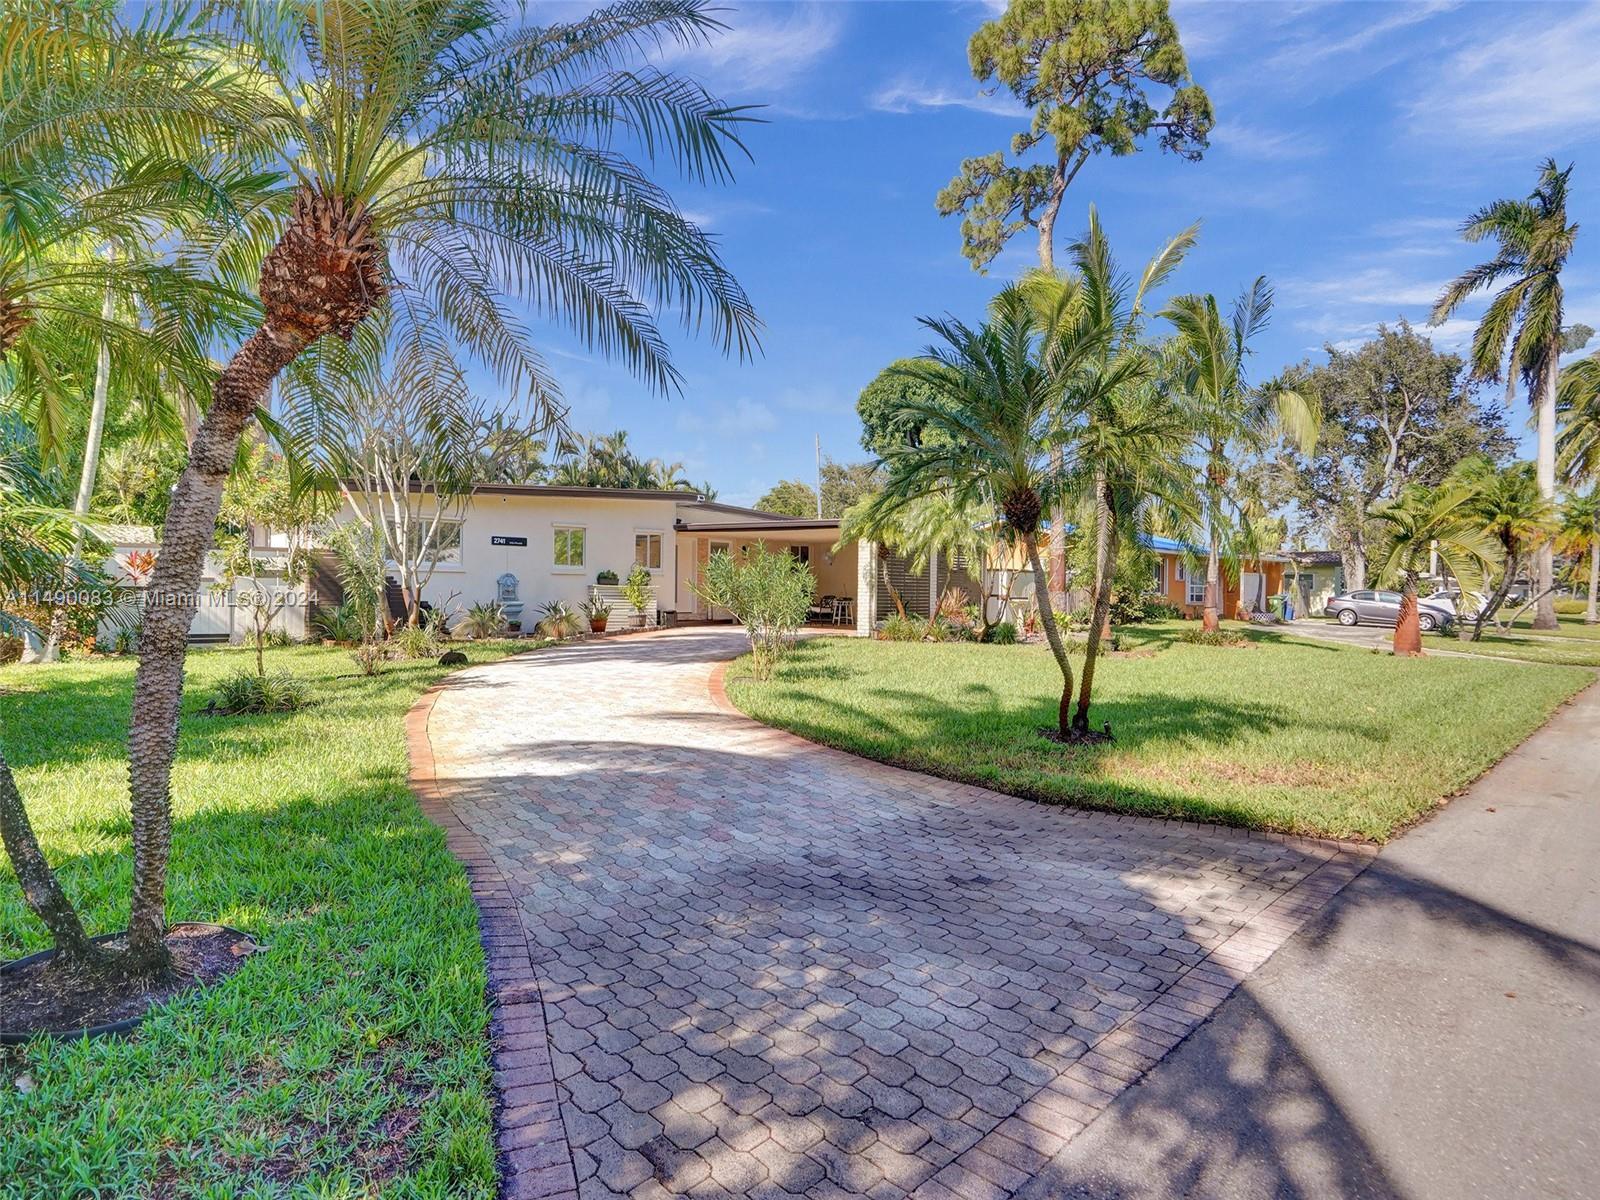 PRICED BELOW APPRAISAL - Villa Pineda is one of those special homes where memories are made, a blend